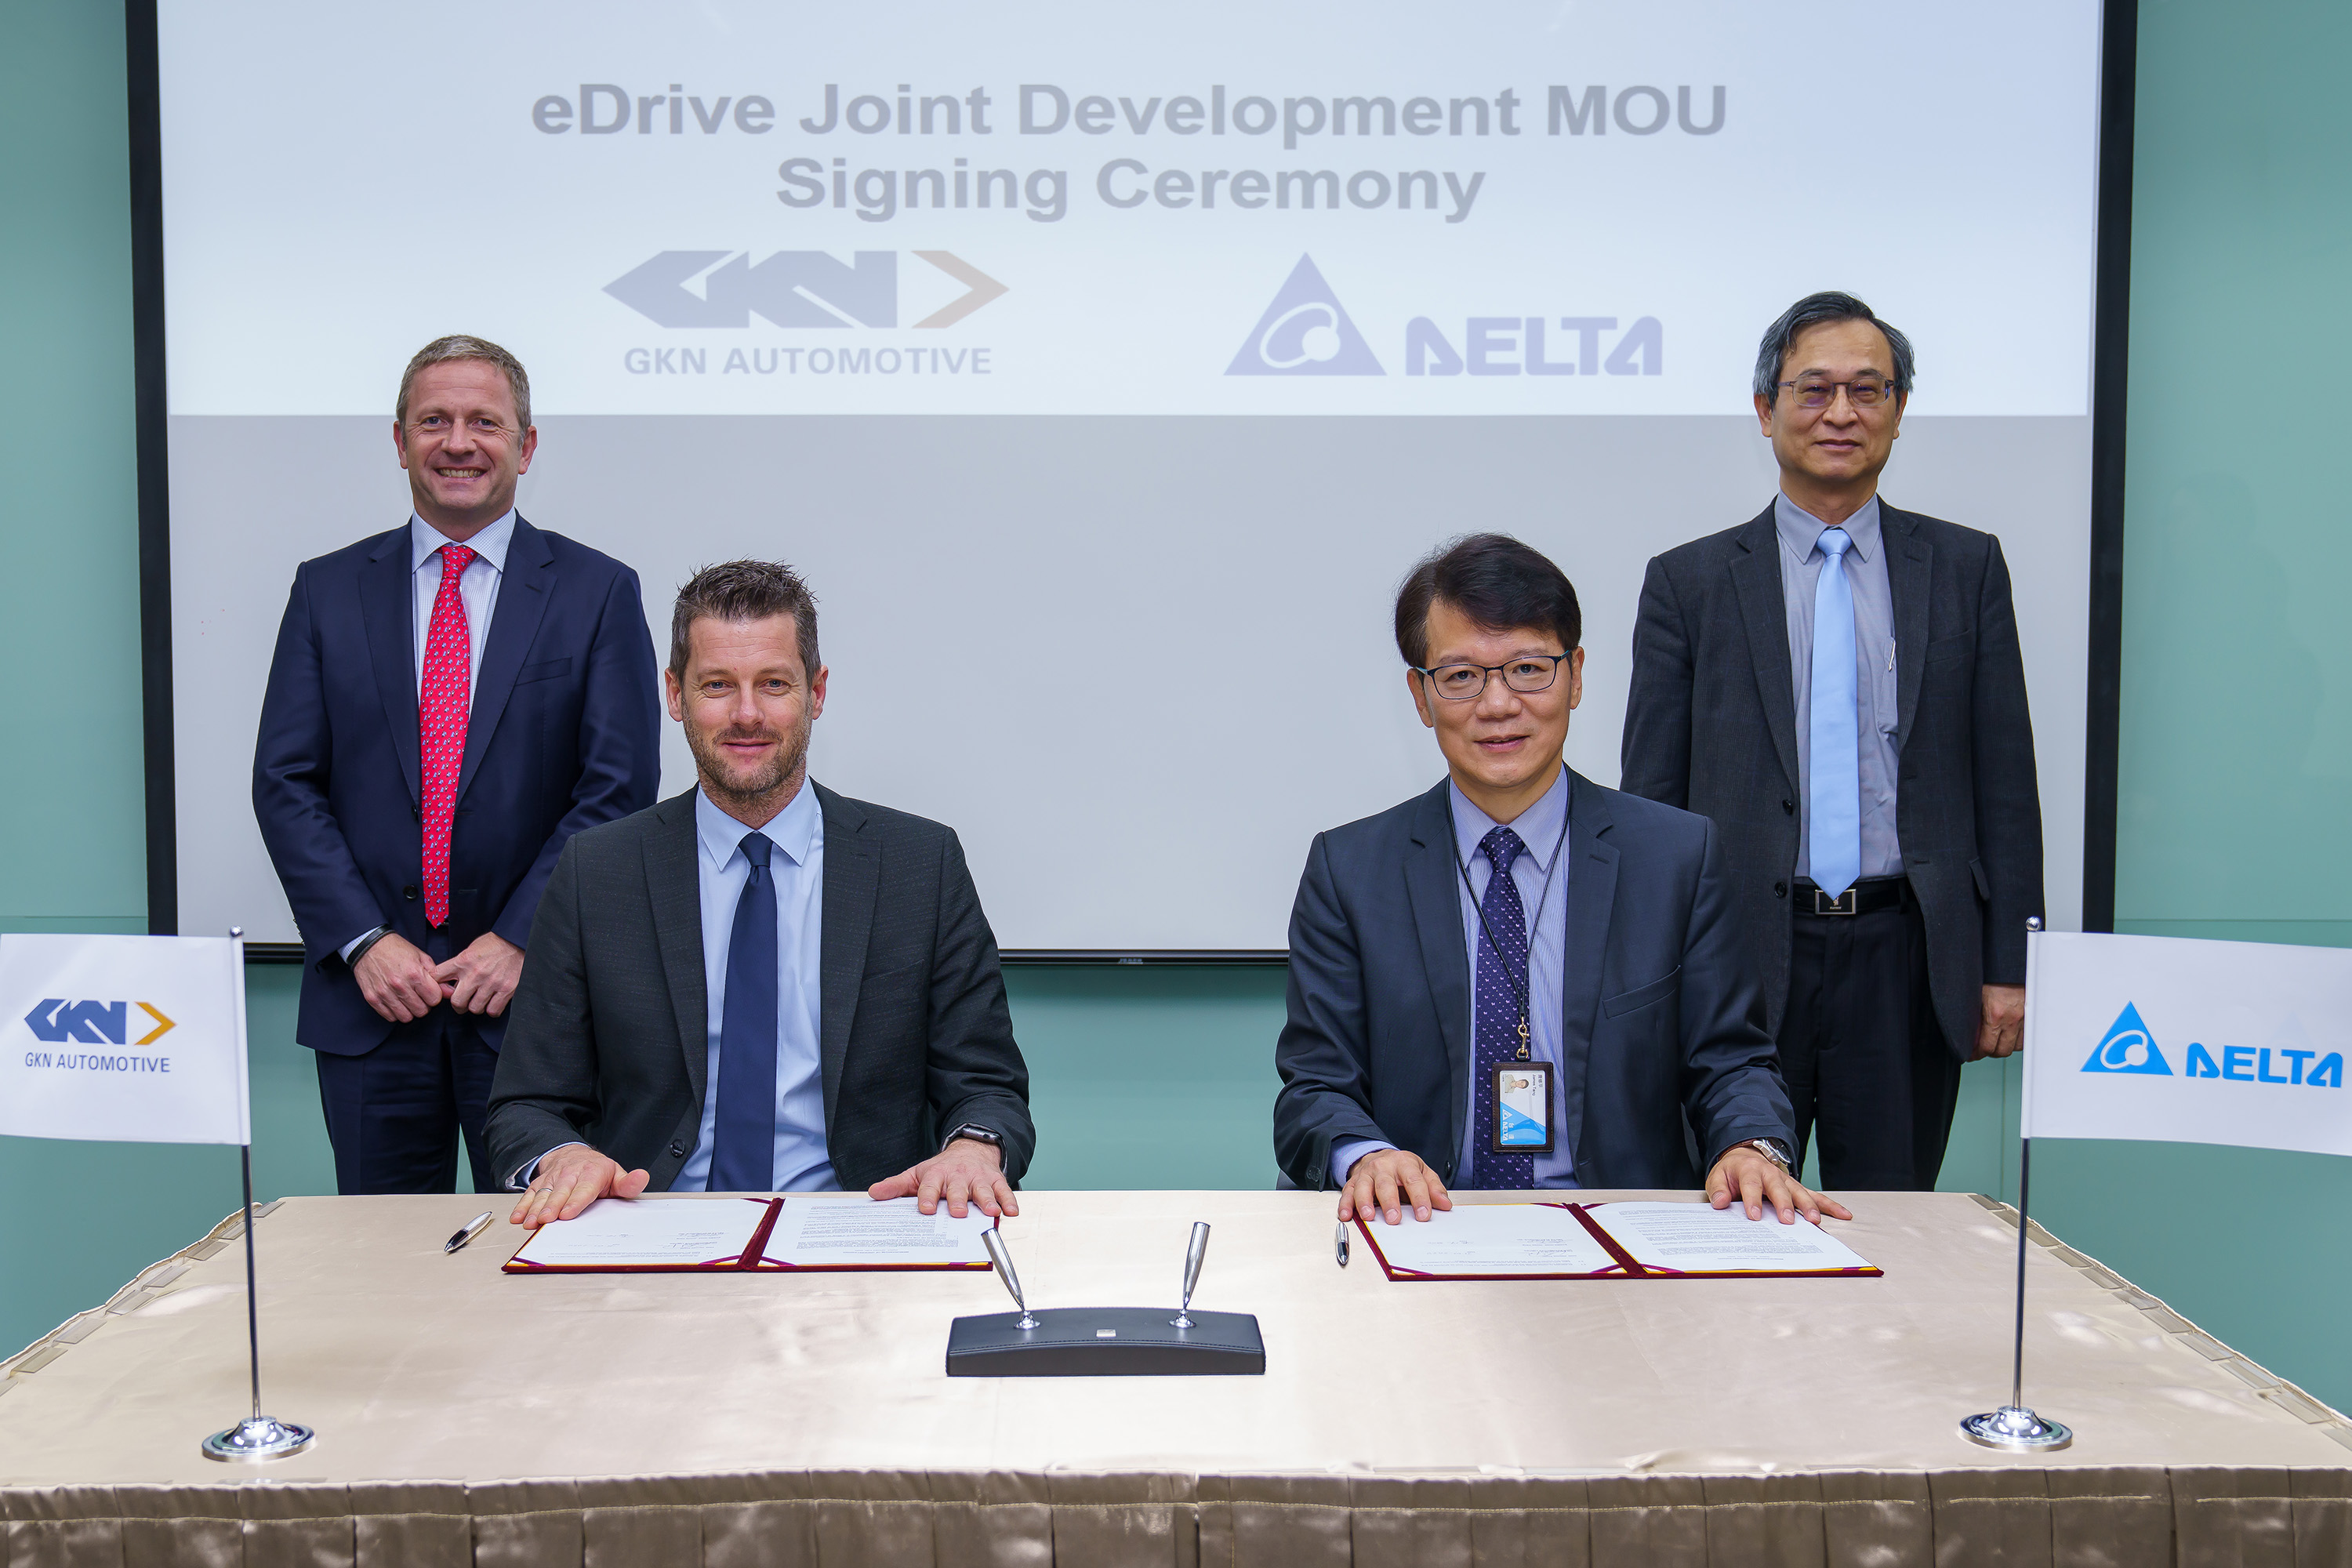 From left to right: Liam Butterworth, CEO, GKN Automotive; Hannes Prenn, COO, ePowertrain, GKN Automotive; Simon Chang, COO, Delta Electronics; James Tang, VP, Delta Electronics.